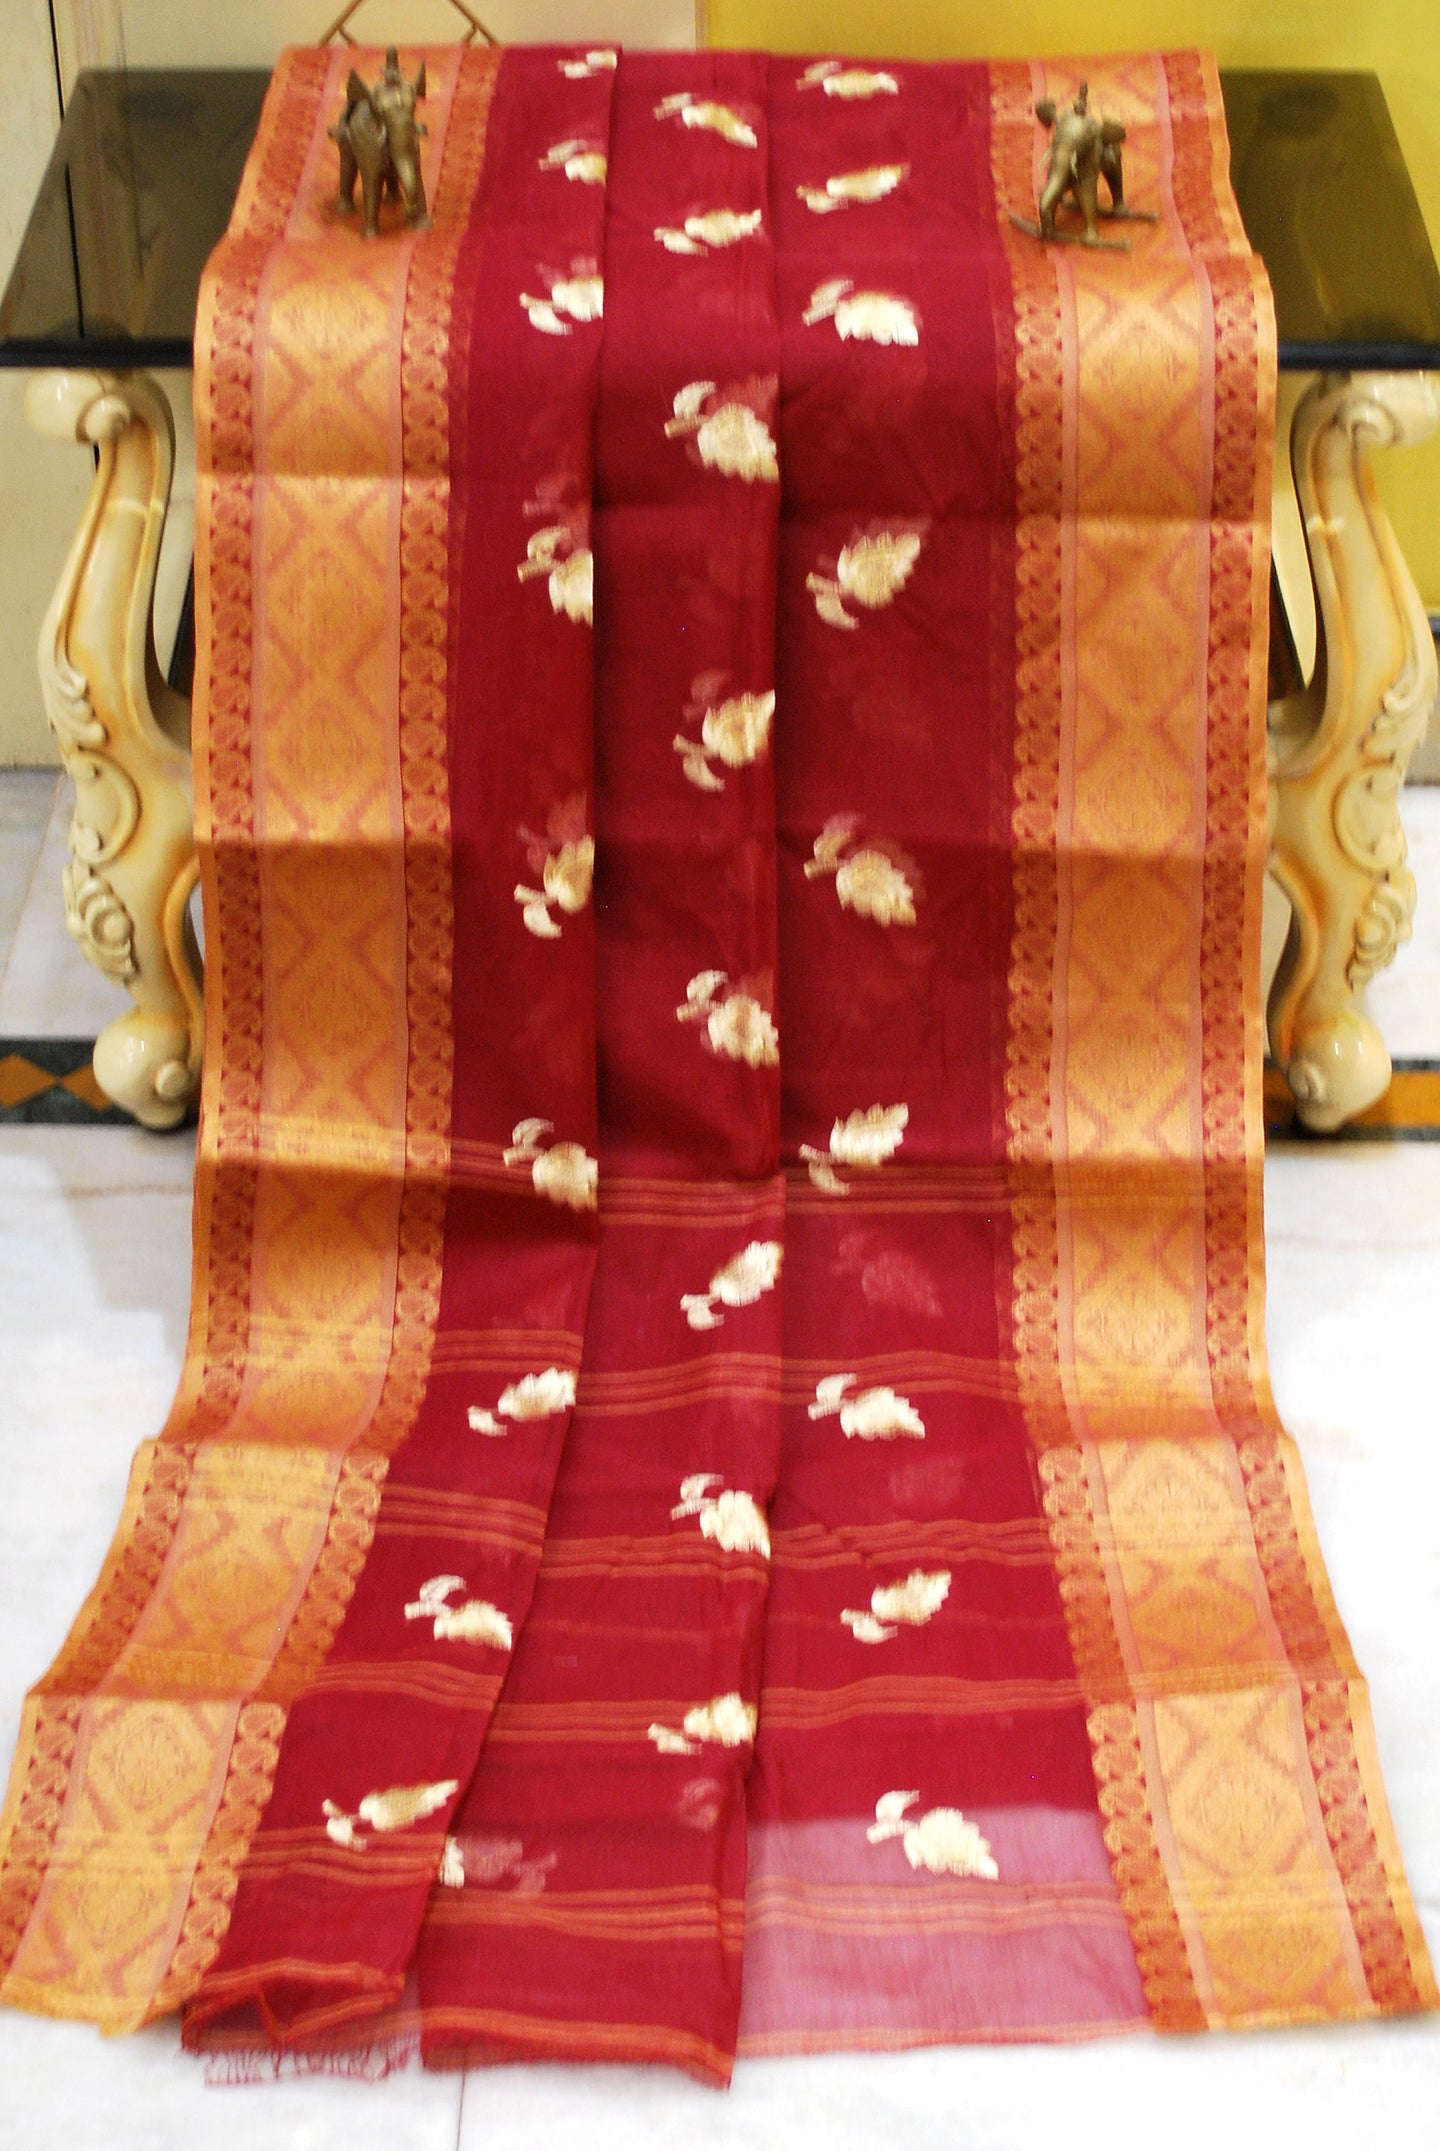 Bengal Handloom Cotton Saree with Leaf Motif Embroidery Work in Maroon and Beige